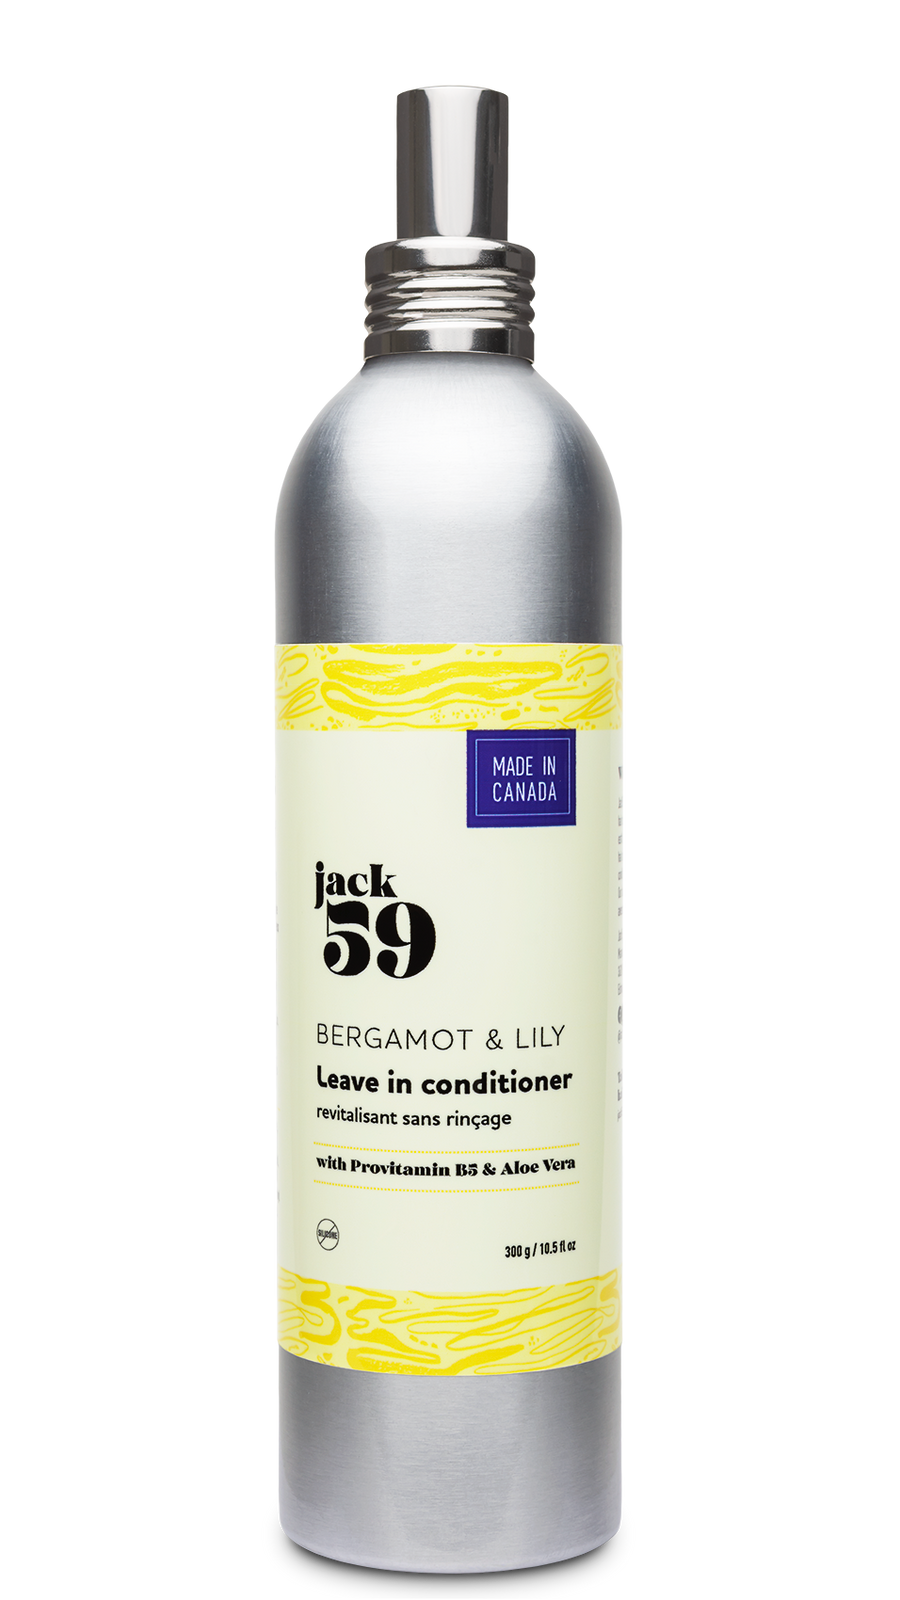 The bergamot & lily leave in conditioner is lightweight, silicone-free, vegan leave in conditioner will transform your hair from tangled and frizzy to soft, silky and manageable.  Apply desired amount to freshly washed hair before styling to help reduce breakage, add shine, control frizz, prevent split ends and protect color on any hair type. Protects hair from heat styling.